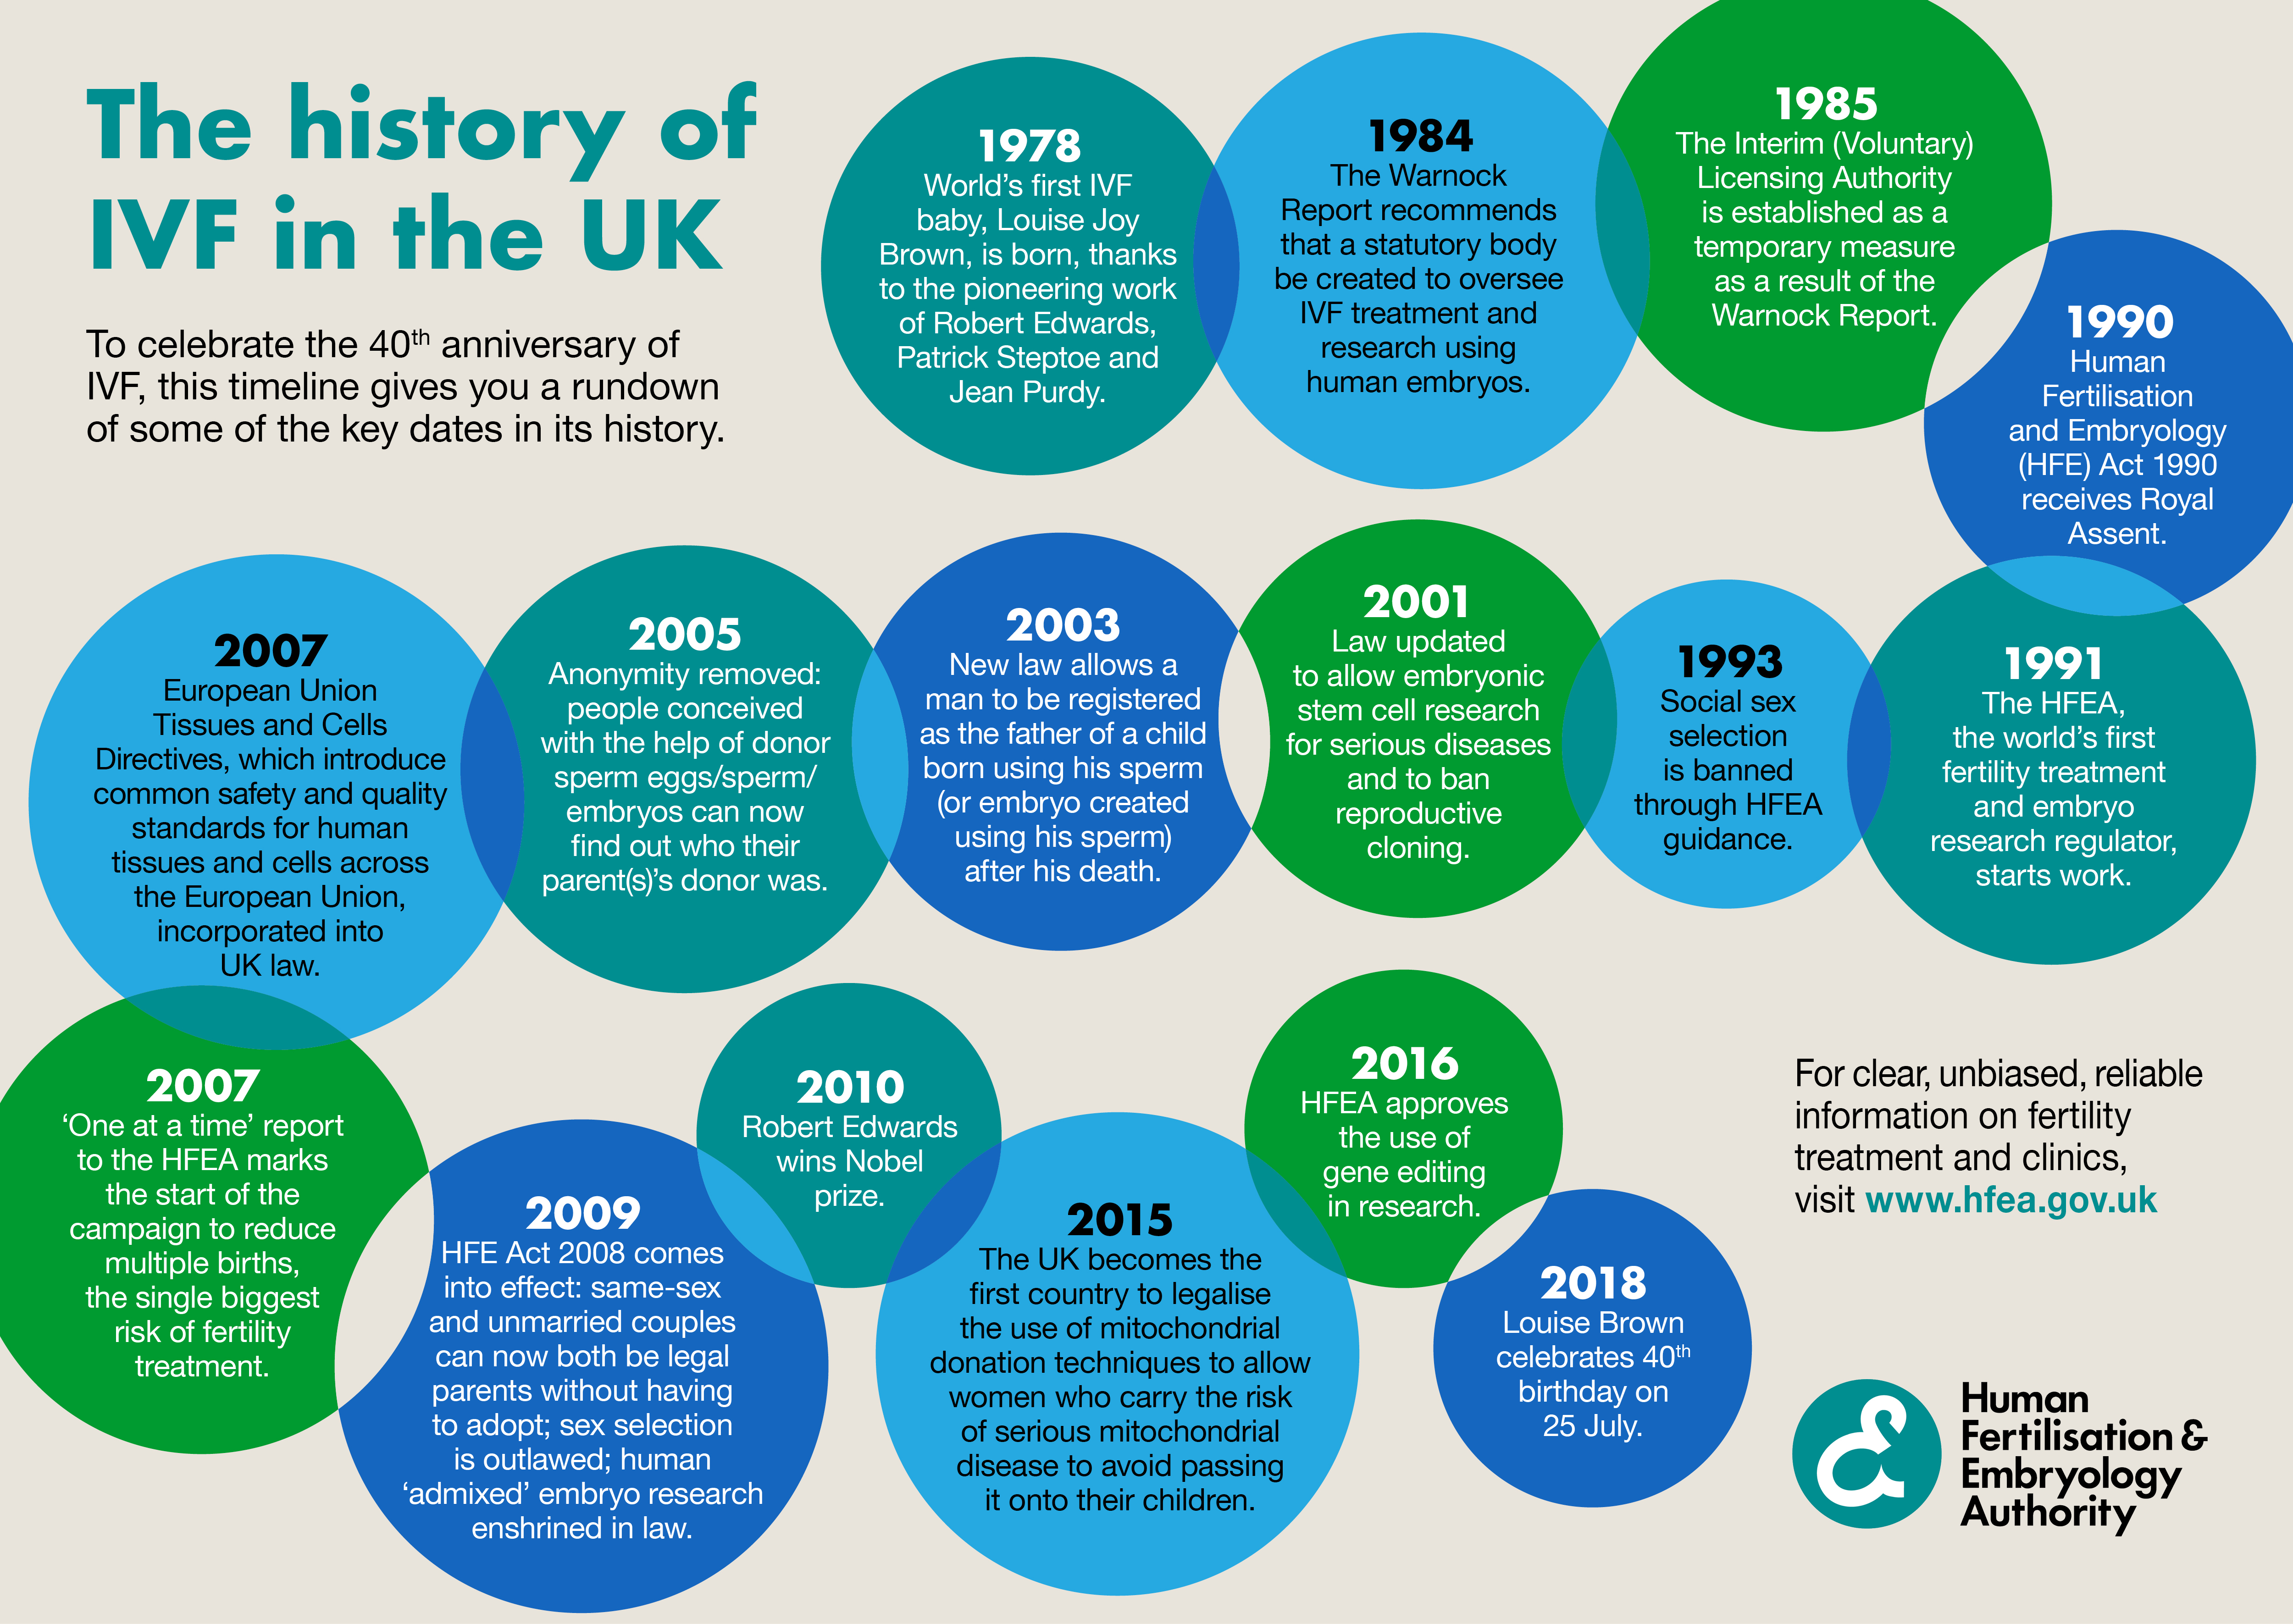 Timeline celebrating the 40th anniversary of IVF in the UK